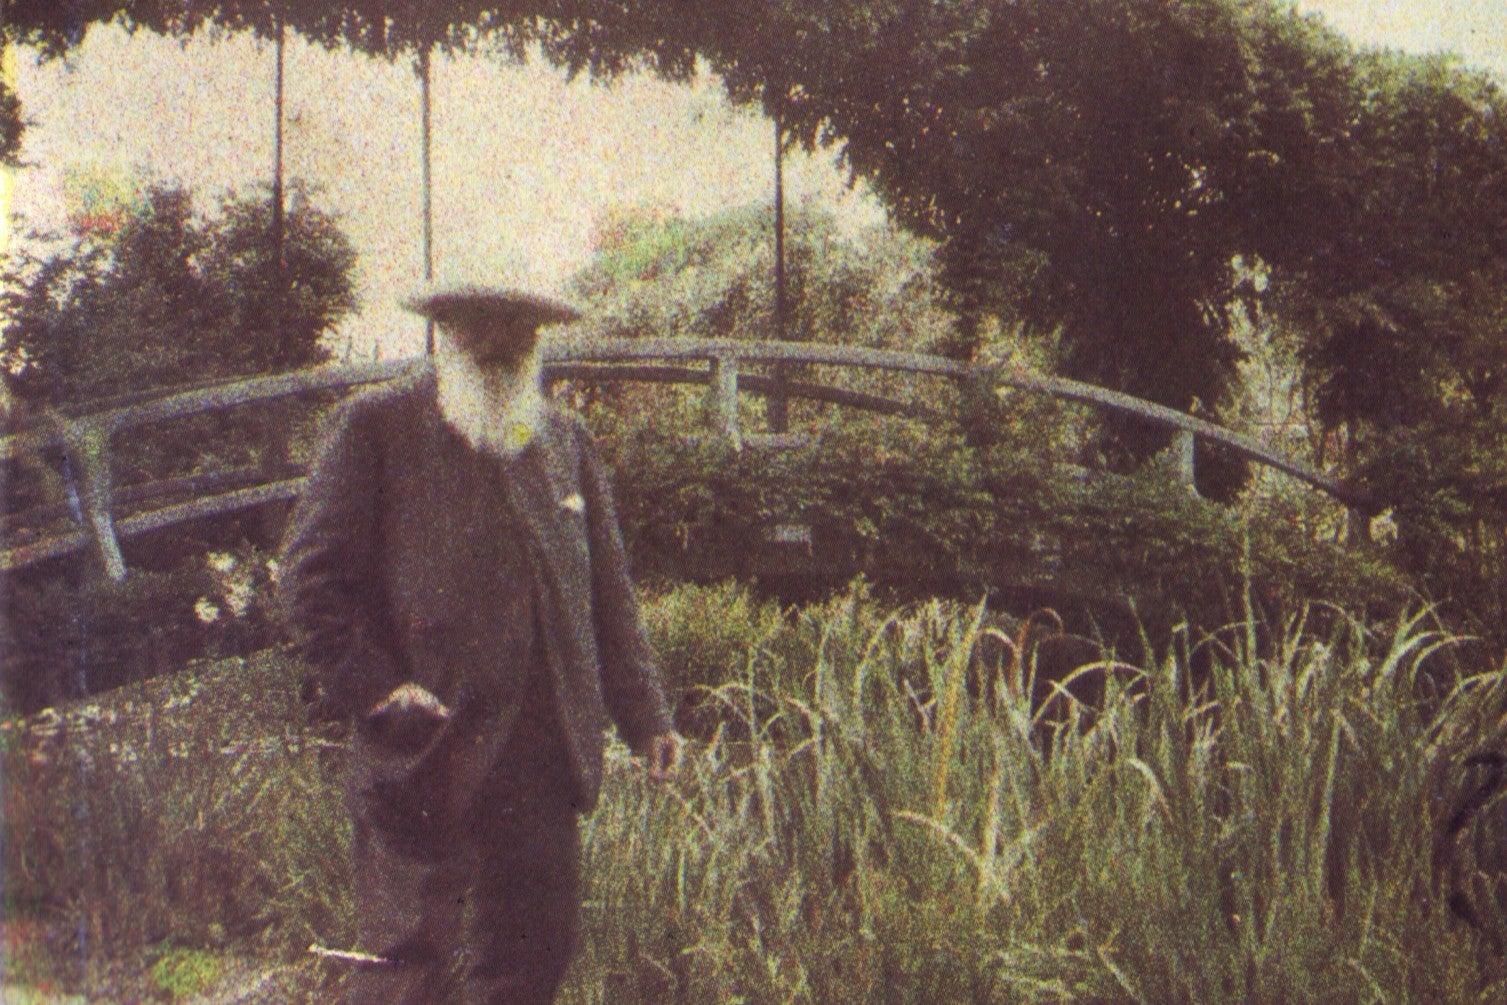 A photo of pioneering Impressionist Claude Monet in his famous gardens in Giverny, France, circa 1917